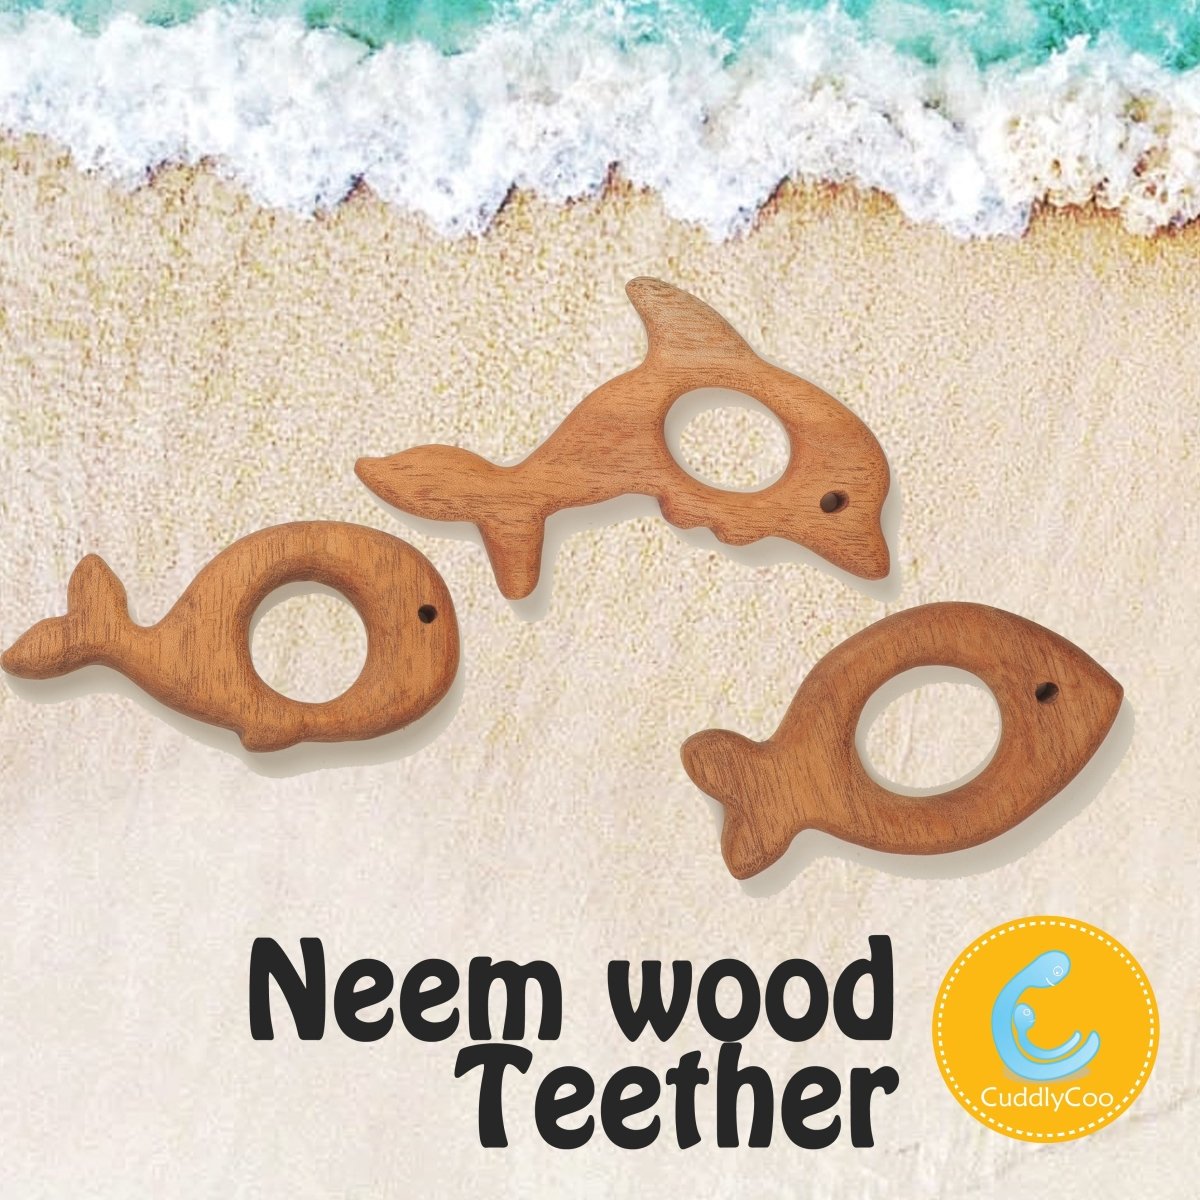 CuddlyCoo Neemwood Teether- Fishes (Set of 3) - CCTEETHER3FISHES